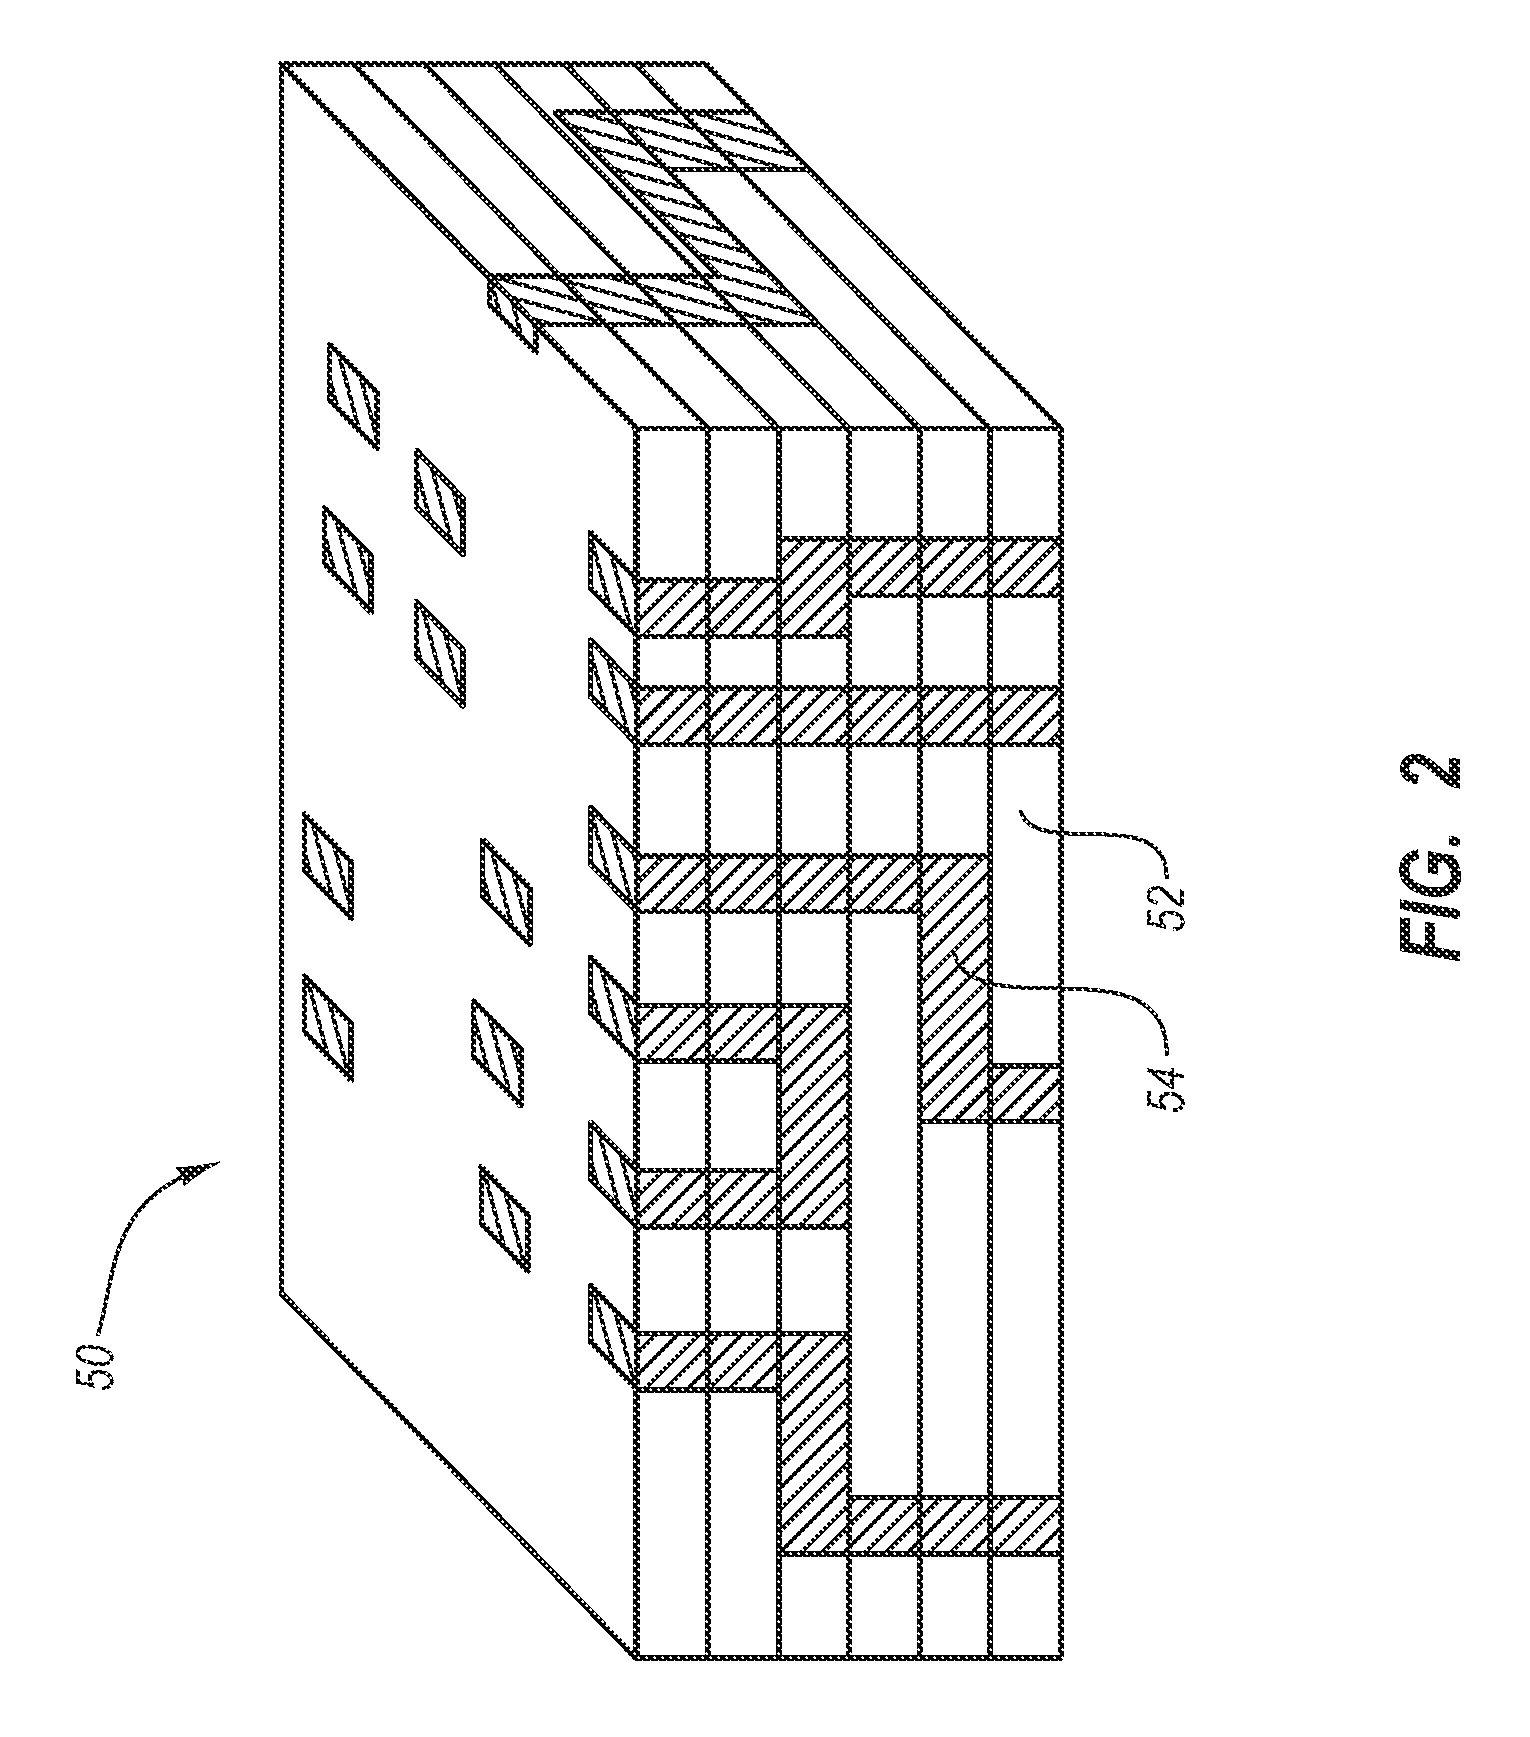 Methods of manufacturing medical devices for controlled drug release